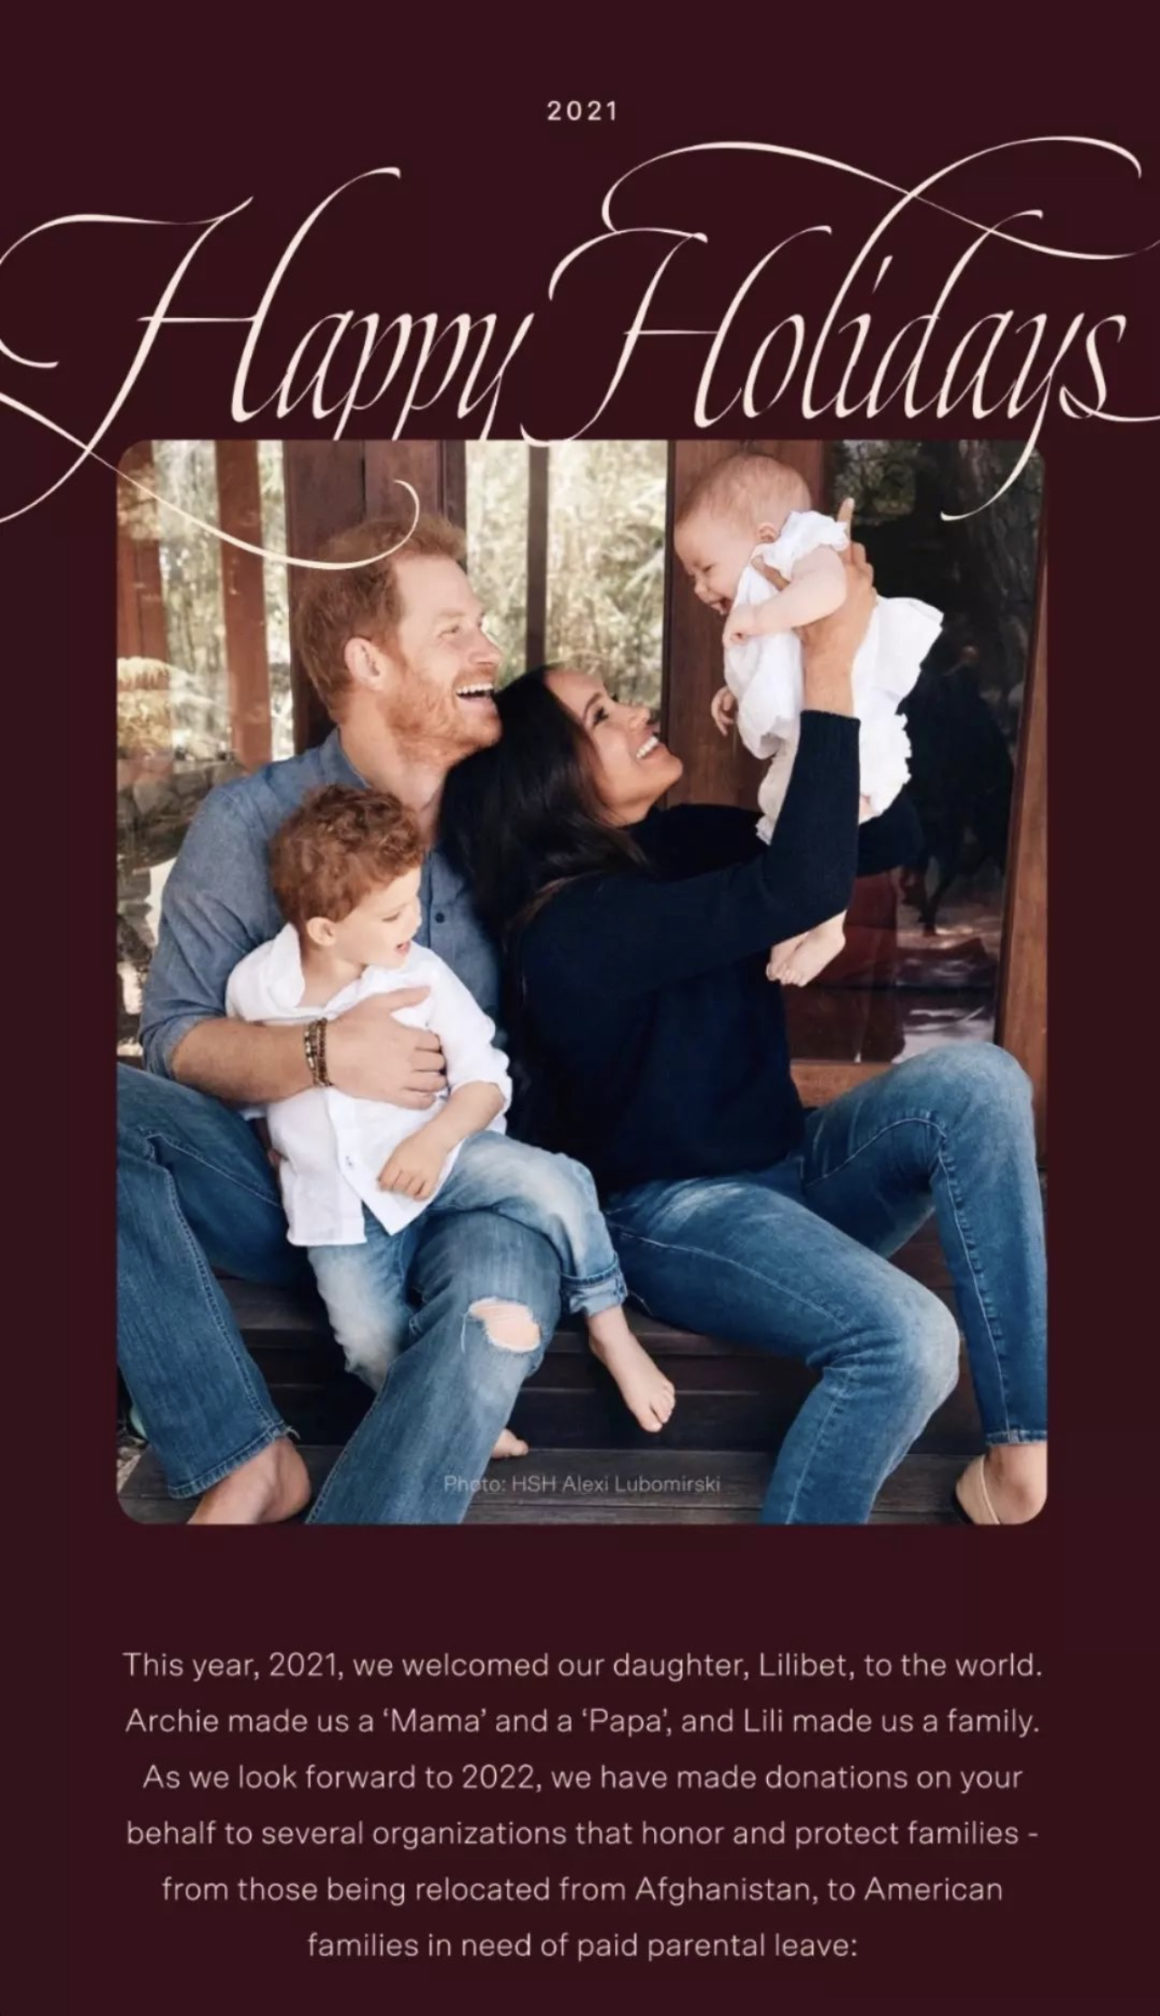 Prince Harry and Meghan Markle Share 2021 Christmas Card Photo Featuring Archie and First Glimpse at Baby Lilibet 3